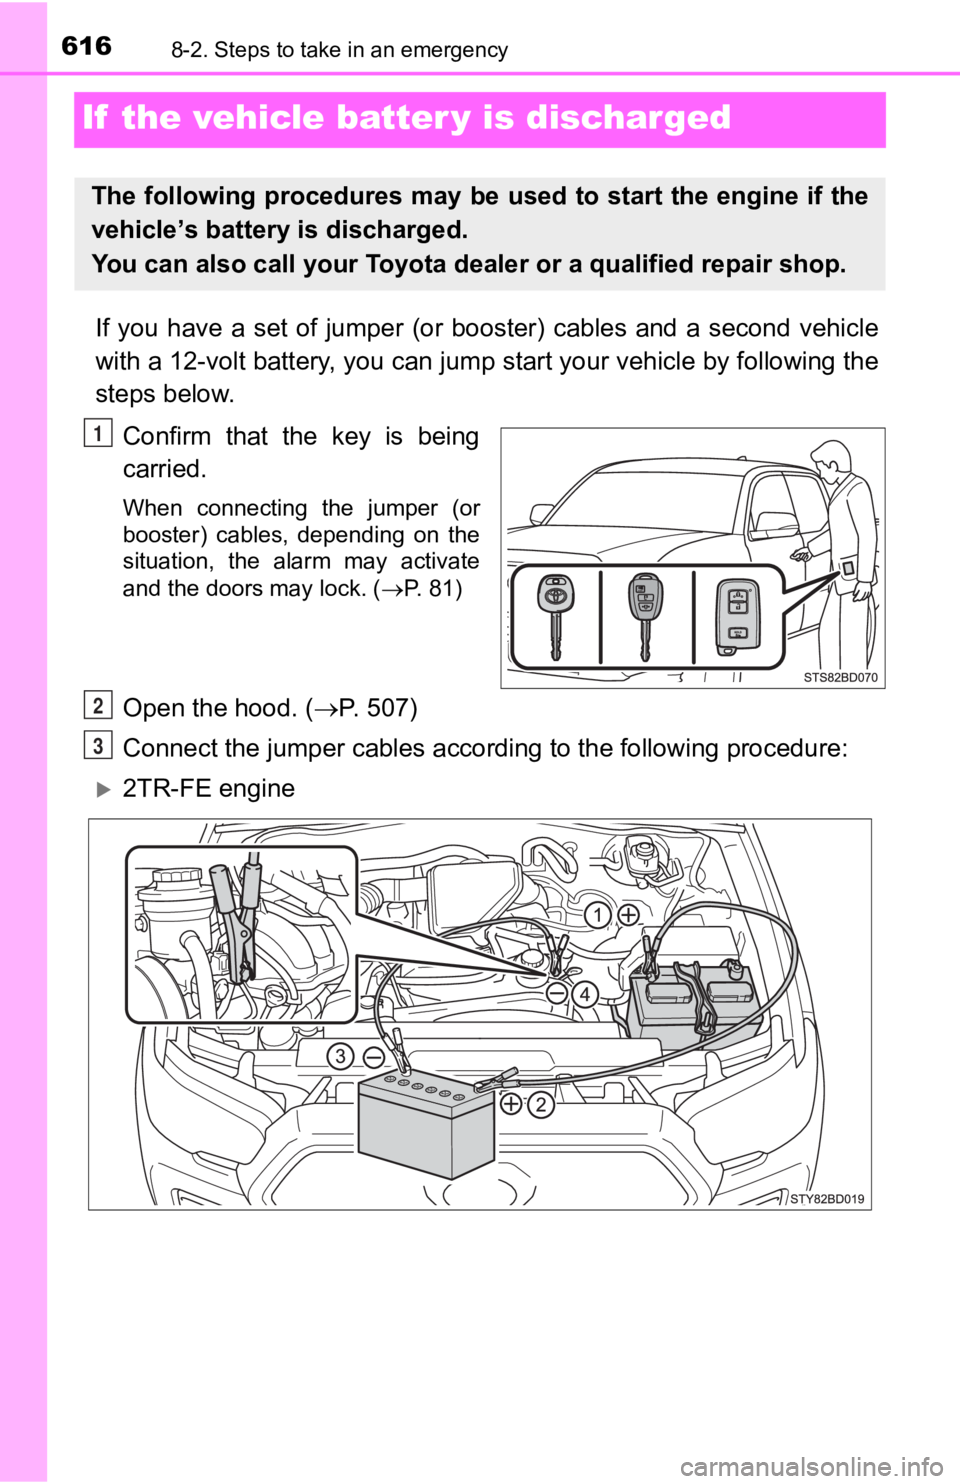 TOYOTA TACOMA 2019  Owners Manual (in English) 6168-2. Steps to take in an emergency
If  the vehicle batter y is discharged
If  you  have  a  set  of  jumper  (or  booster)  cables  and  a  second  ve hicle
with a 12-volt battery, you can jump sta